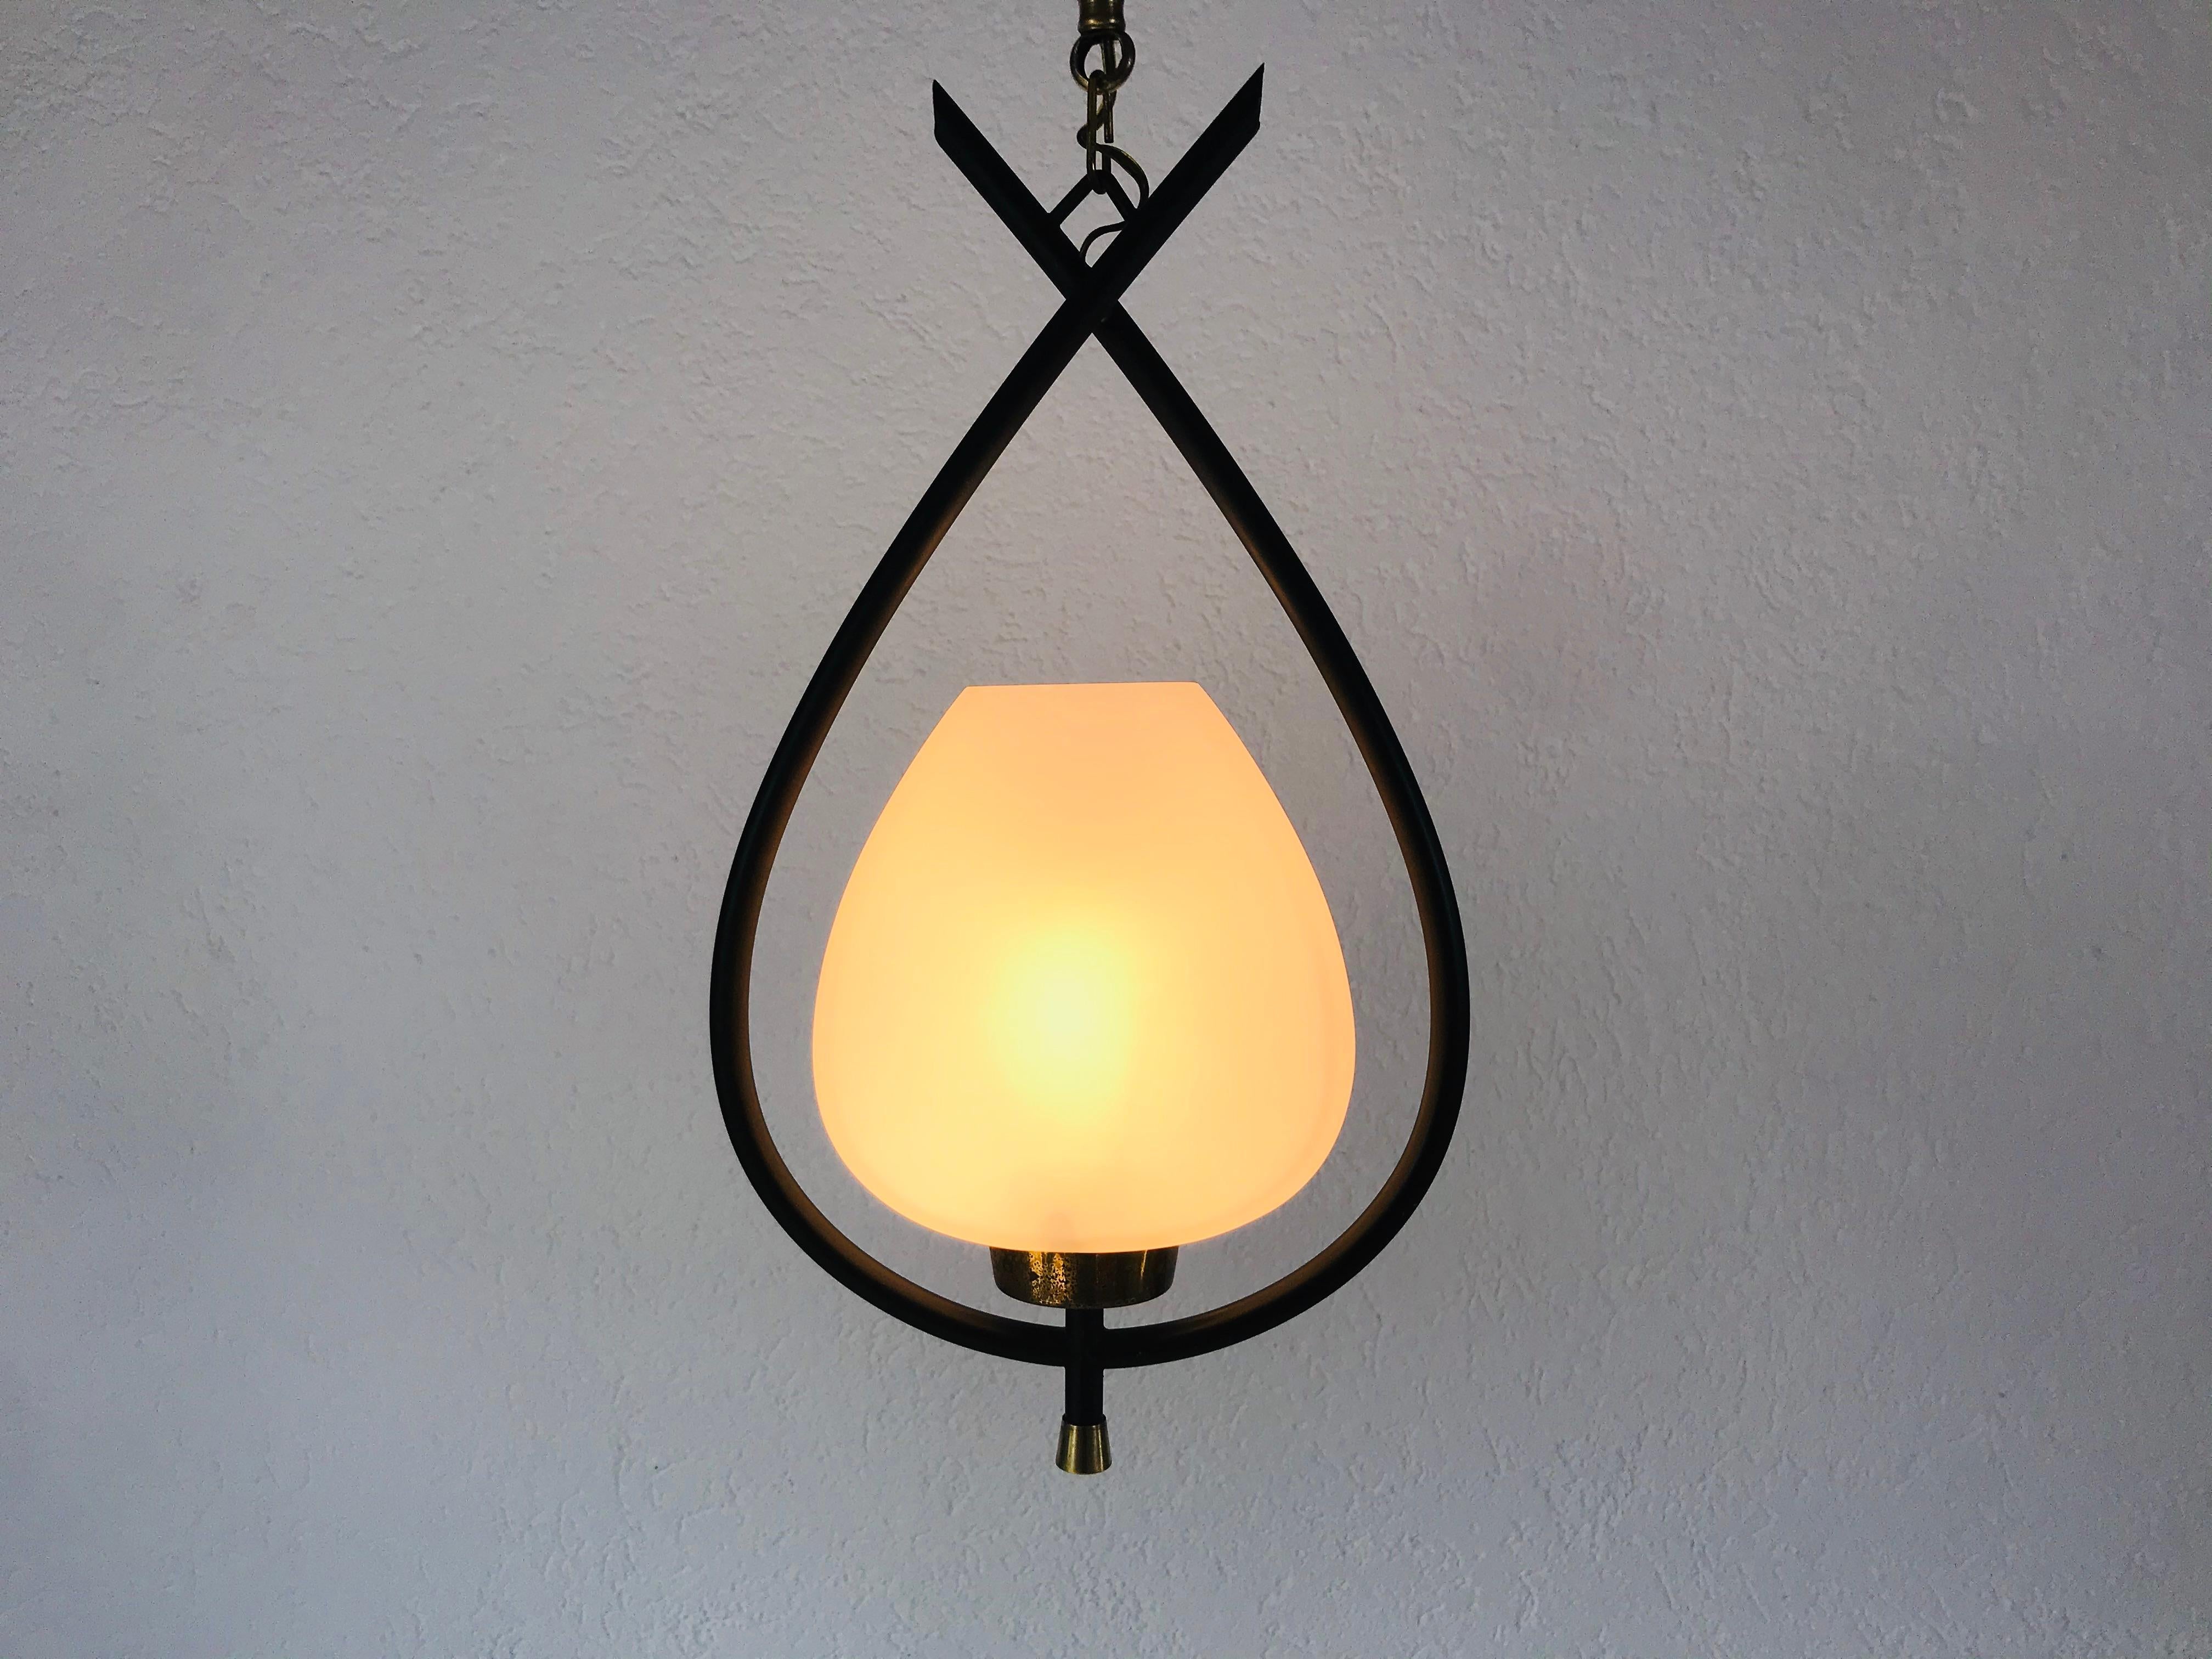 Very rare pendant lamp from Maison Lunel from the 1950s. The light has a black thin metal body with an opaline glass. There are brass parts on the bottom of the fixture. The chain is also made of brass.

The light requires one B15 light bulbs.